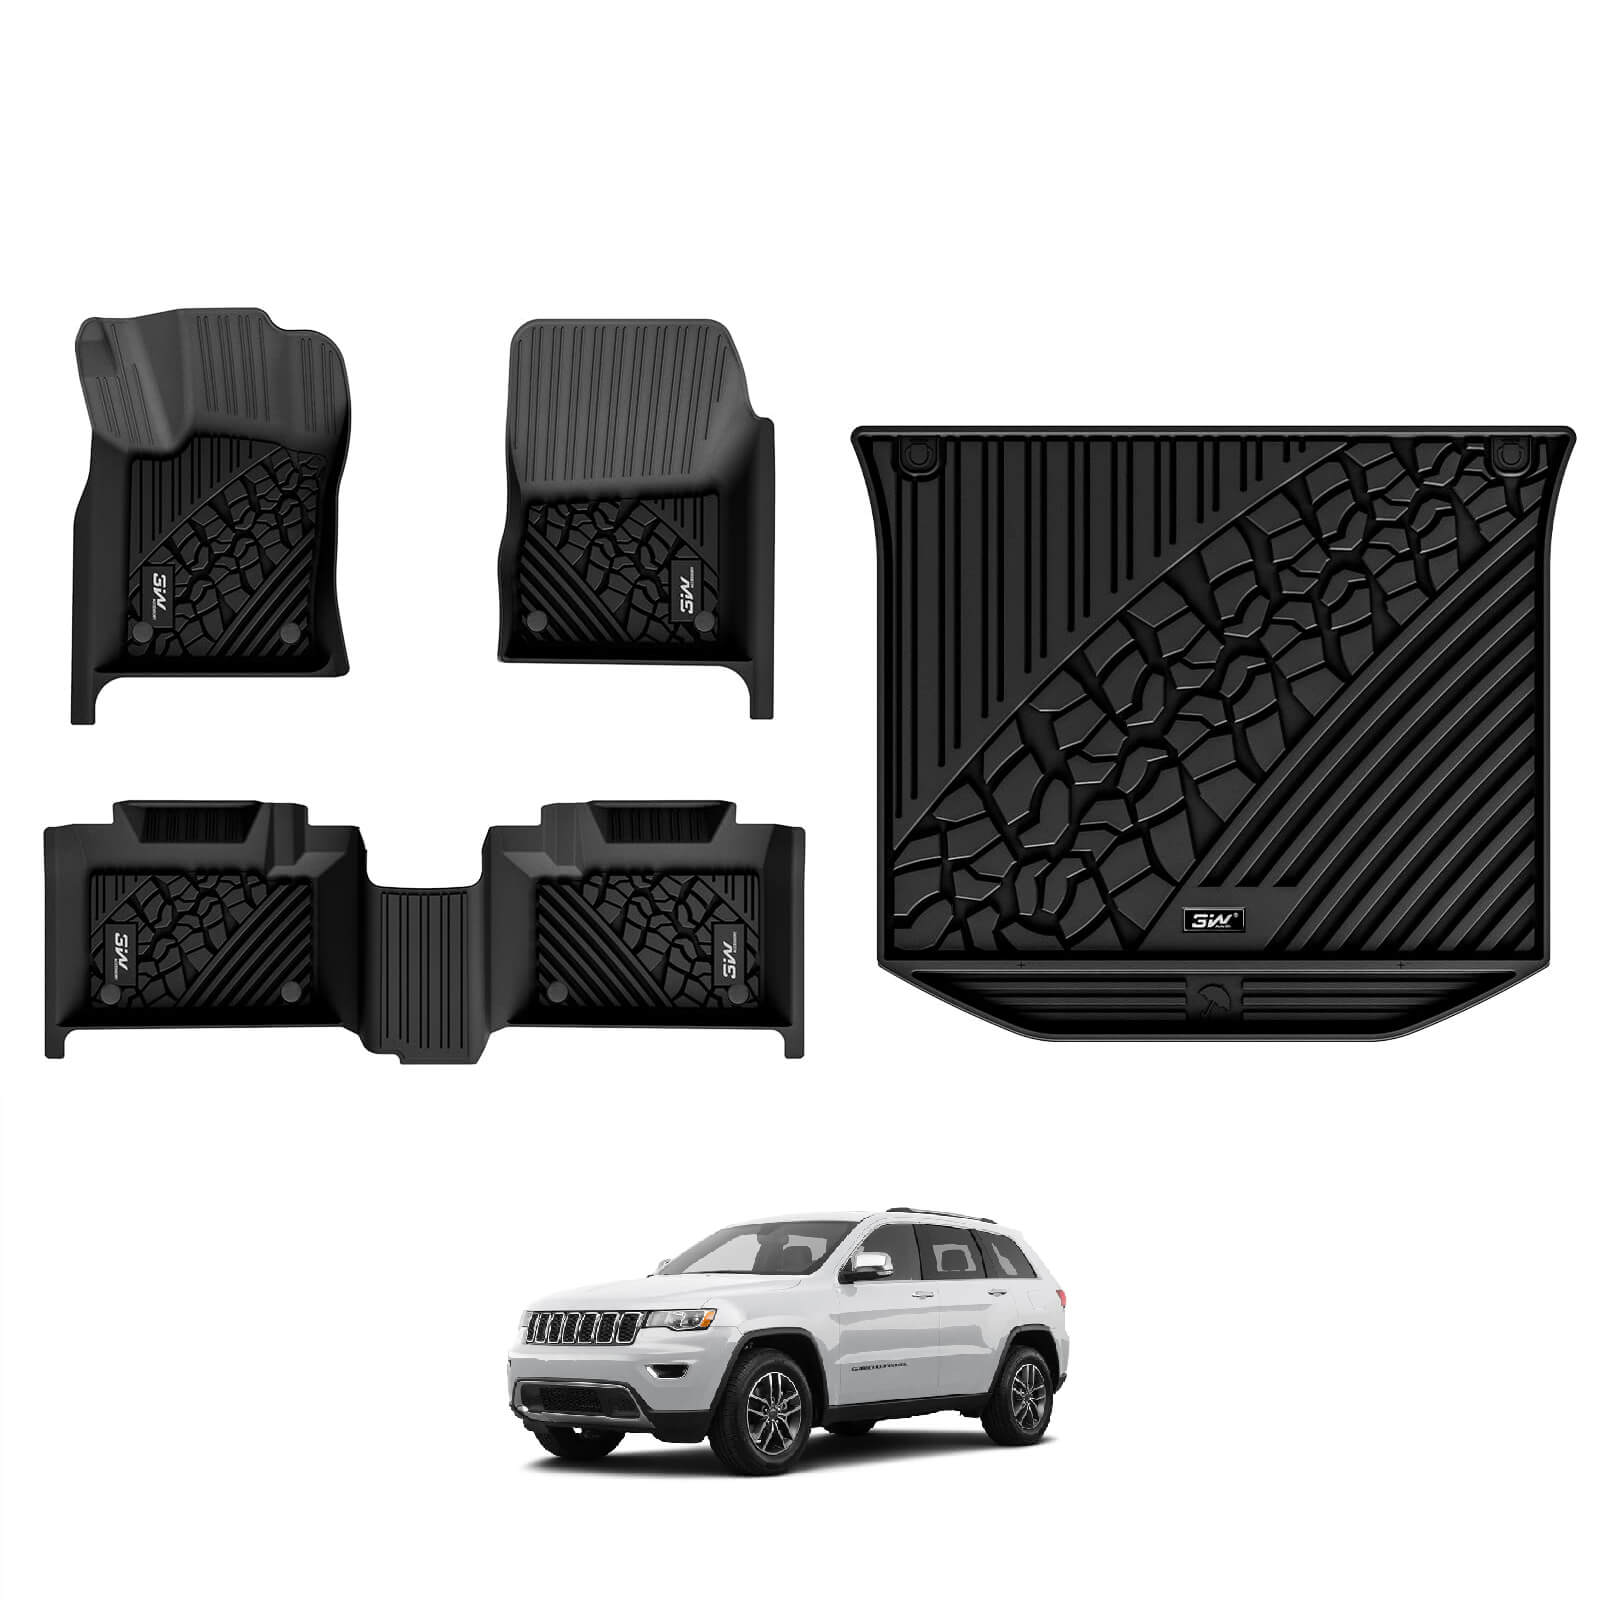 3W Floor Mats Jeep Grand Cherokee 2016-2021 / Grand Cherokee WK 2022-2023 (Non L) Custom Cargo Liner TPE Material & All-Weather Protection Vehicles & Parts 3W 2016-2021 Grand Cherokee 2016-2021 1st&2nd Row Mats+Trunk Mat